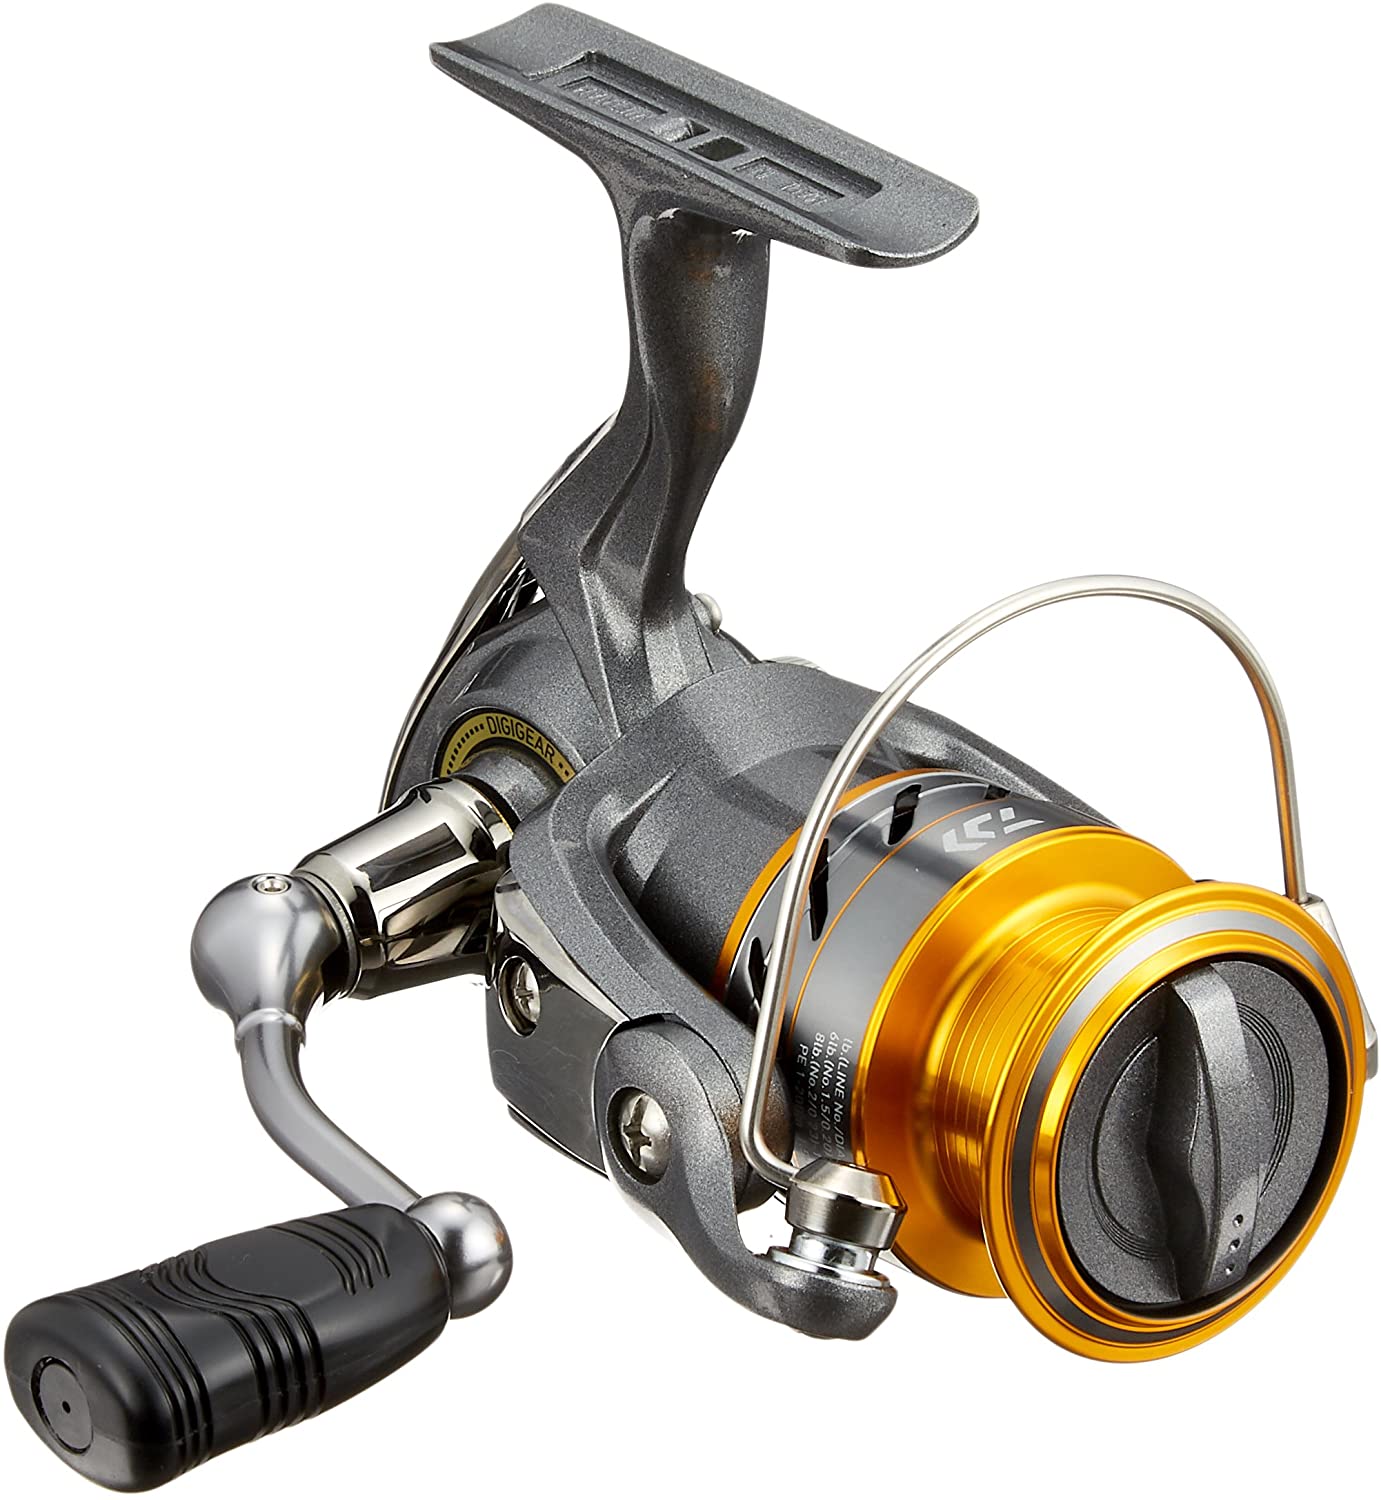 DAIWA Spinning Reel 17 World Spin CF (2017 model) - Discovery